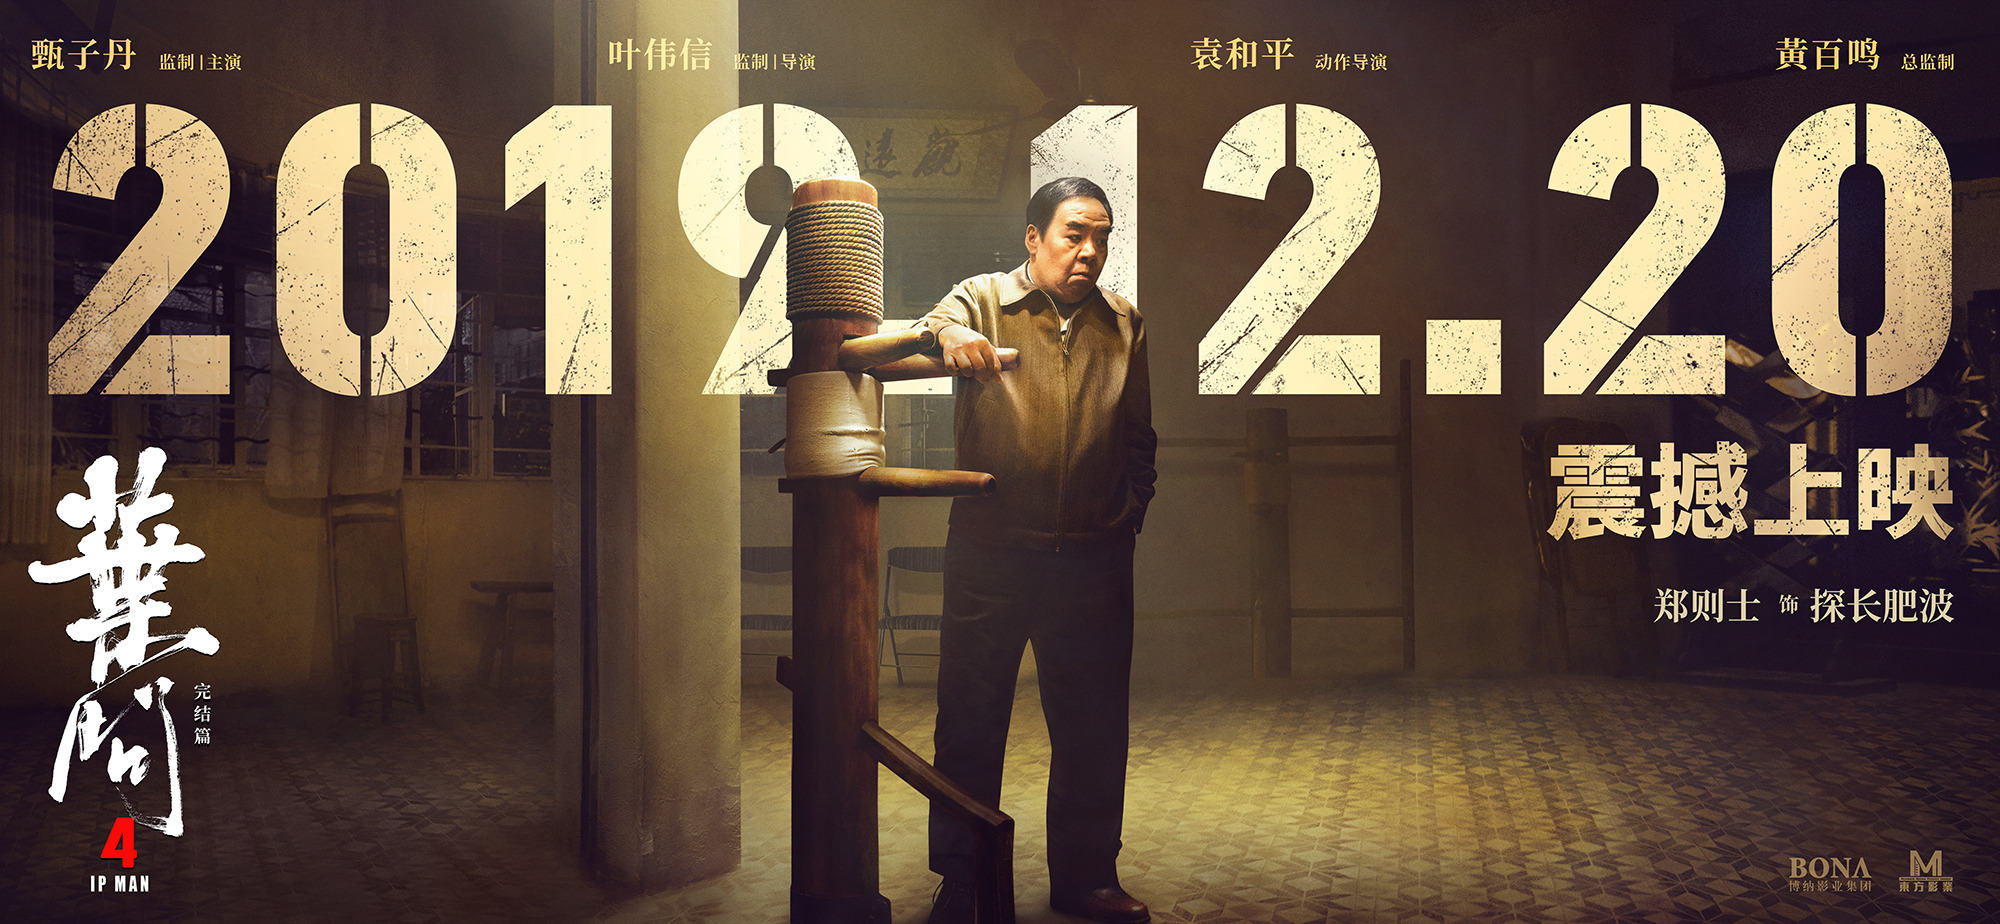 Mega Sized Movie Poster Image for Yip Man 4 (#8 of 15)